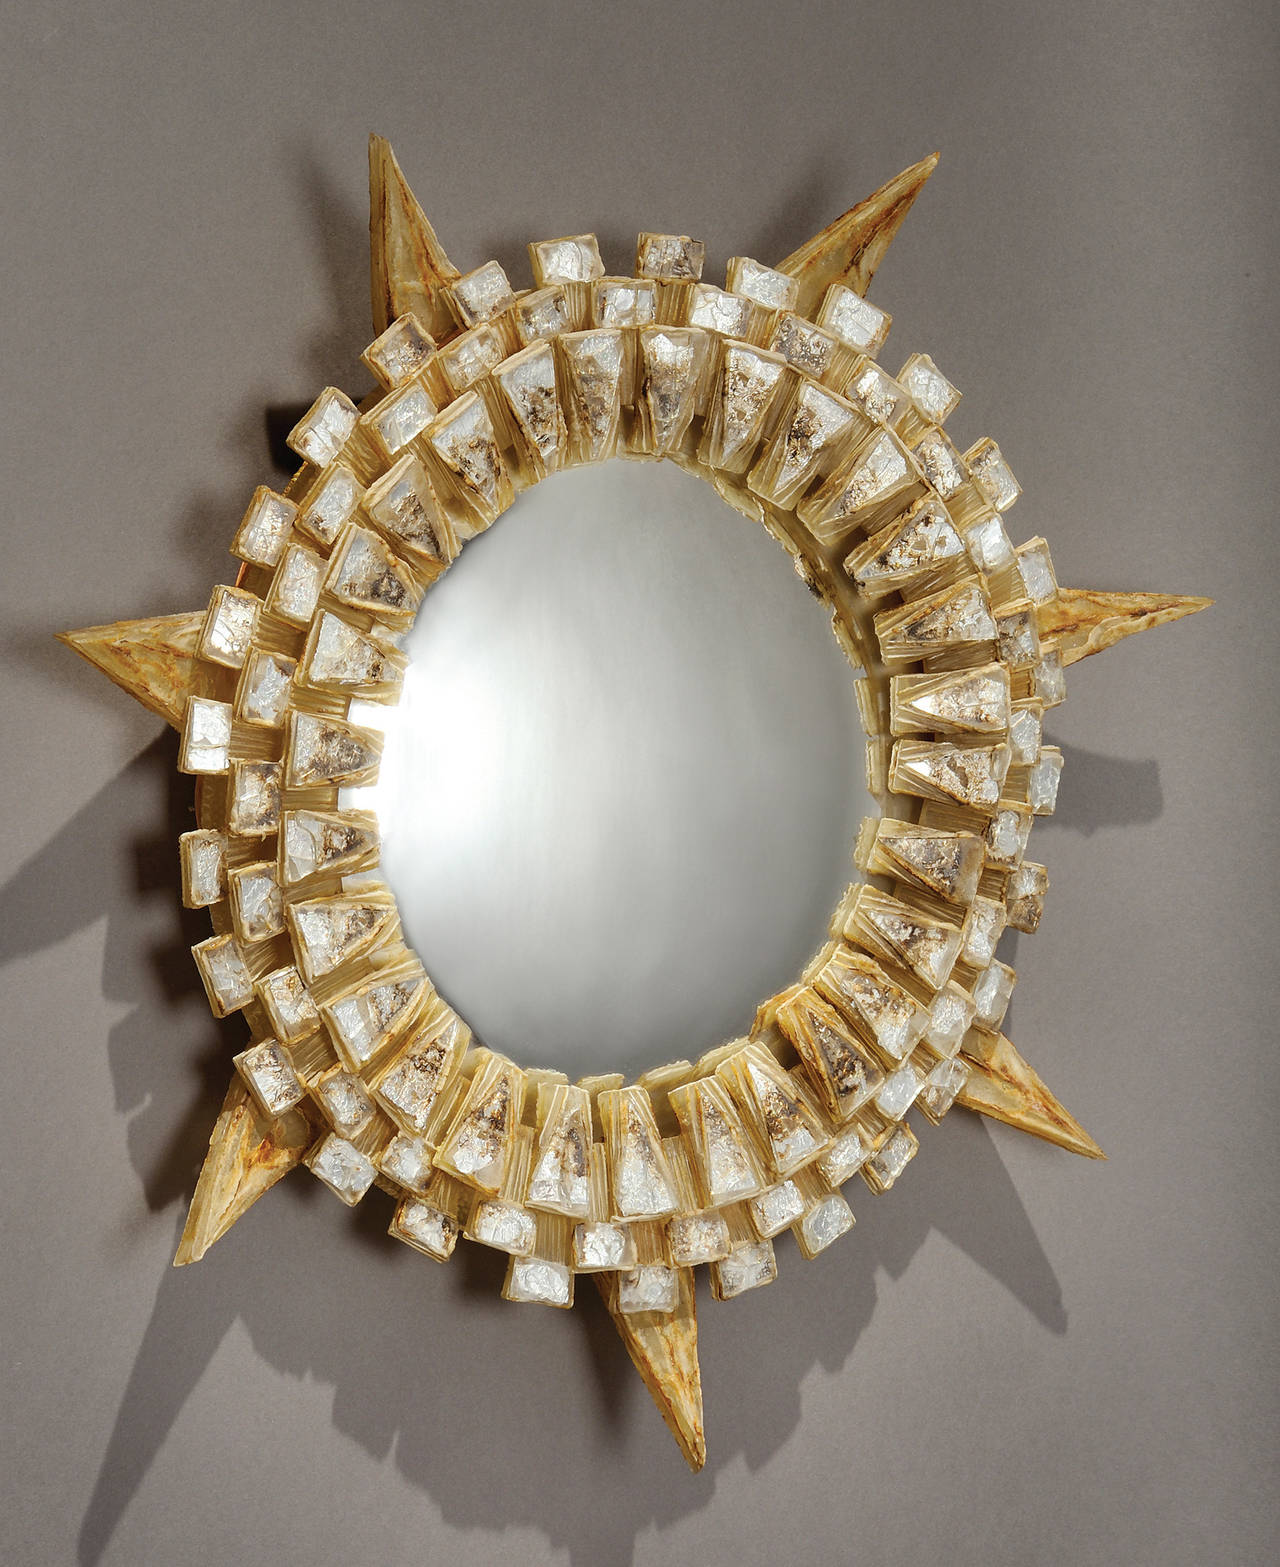 1955.
Description: Unique and exceptional talosel and resin convex mirror by Line Vautrin. Talosel is a resin material invented by Vautrin. It is derived from cellulose acetate and the name is shortened form of 'acetate de cellulose elabore,'